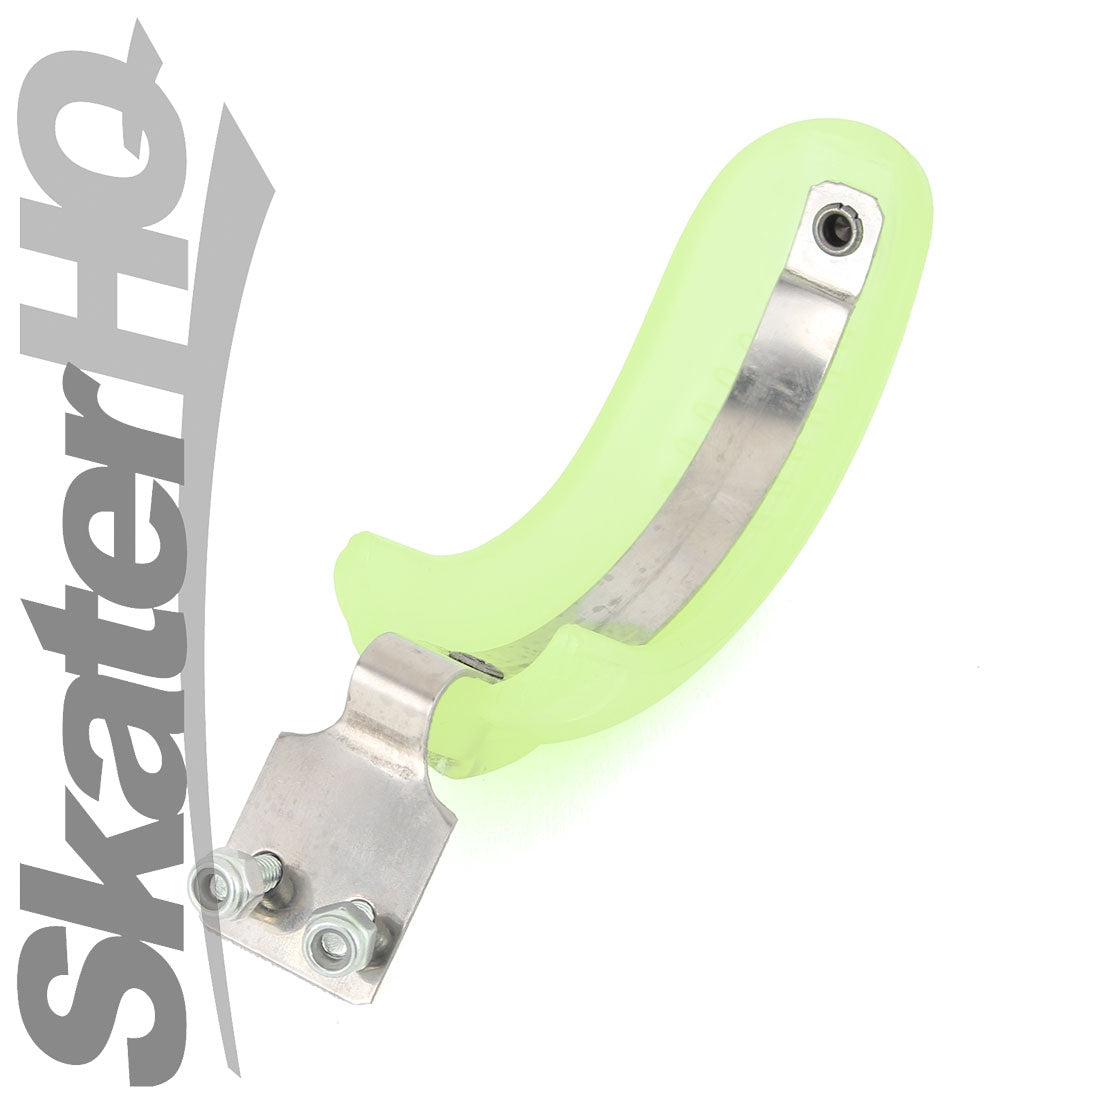 Micro Mini Deluxe Brake 1690 - Lime (for Green) Scooter Hardware and Parts